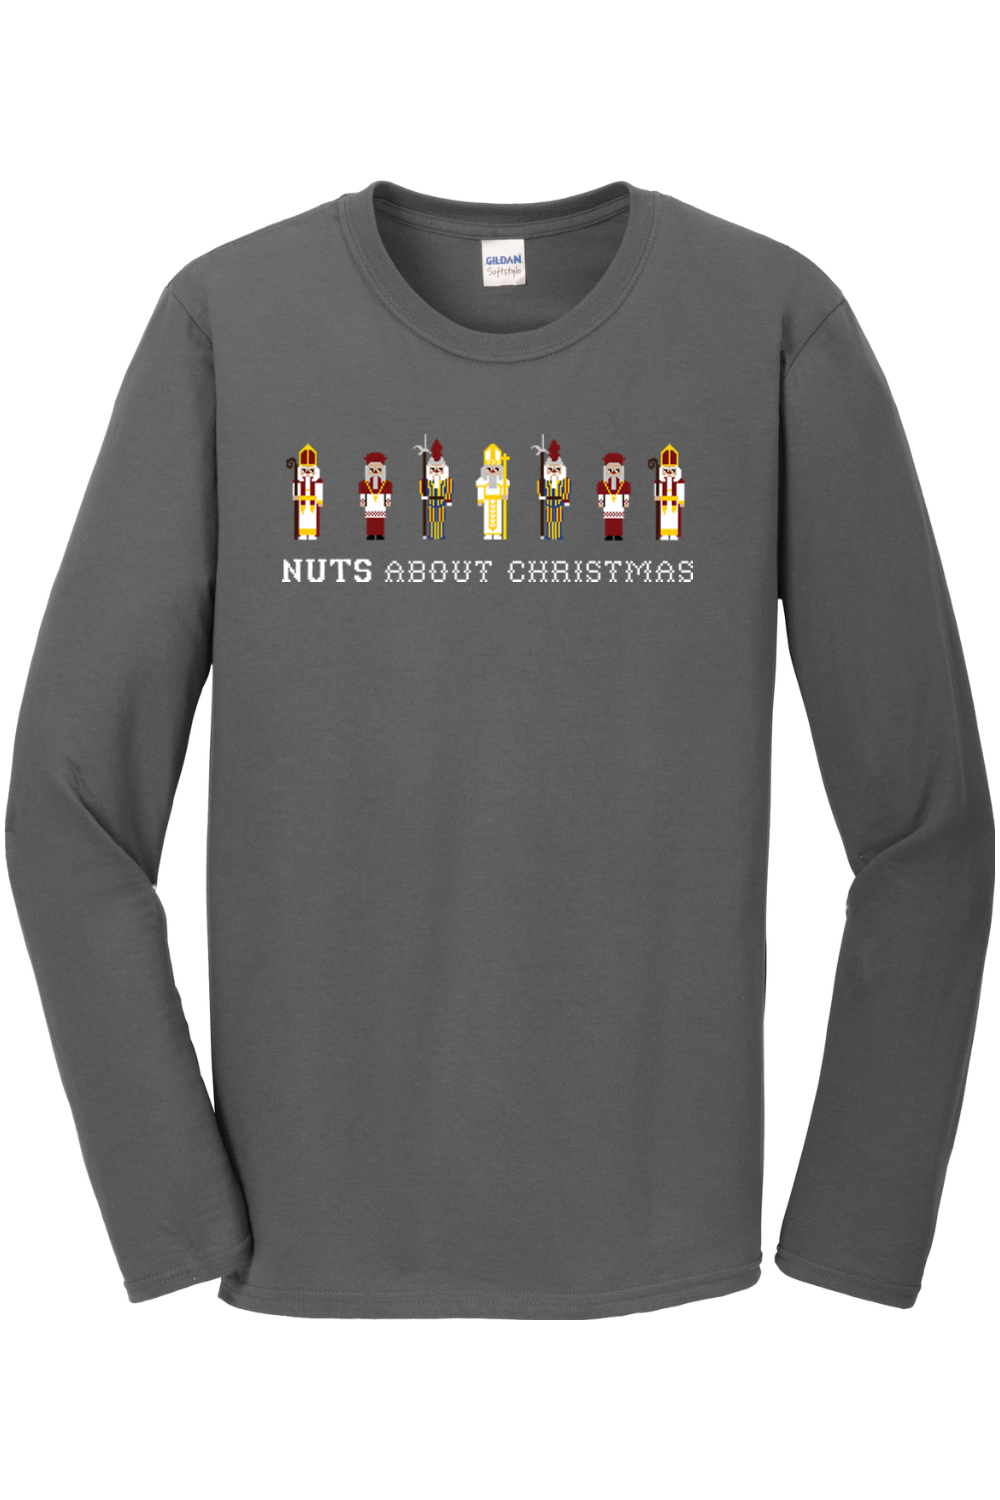 Nuts About Christmas Long Sleeve